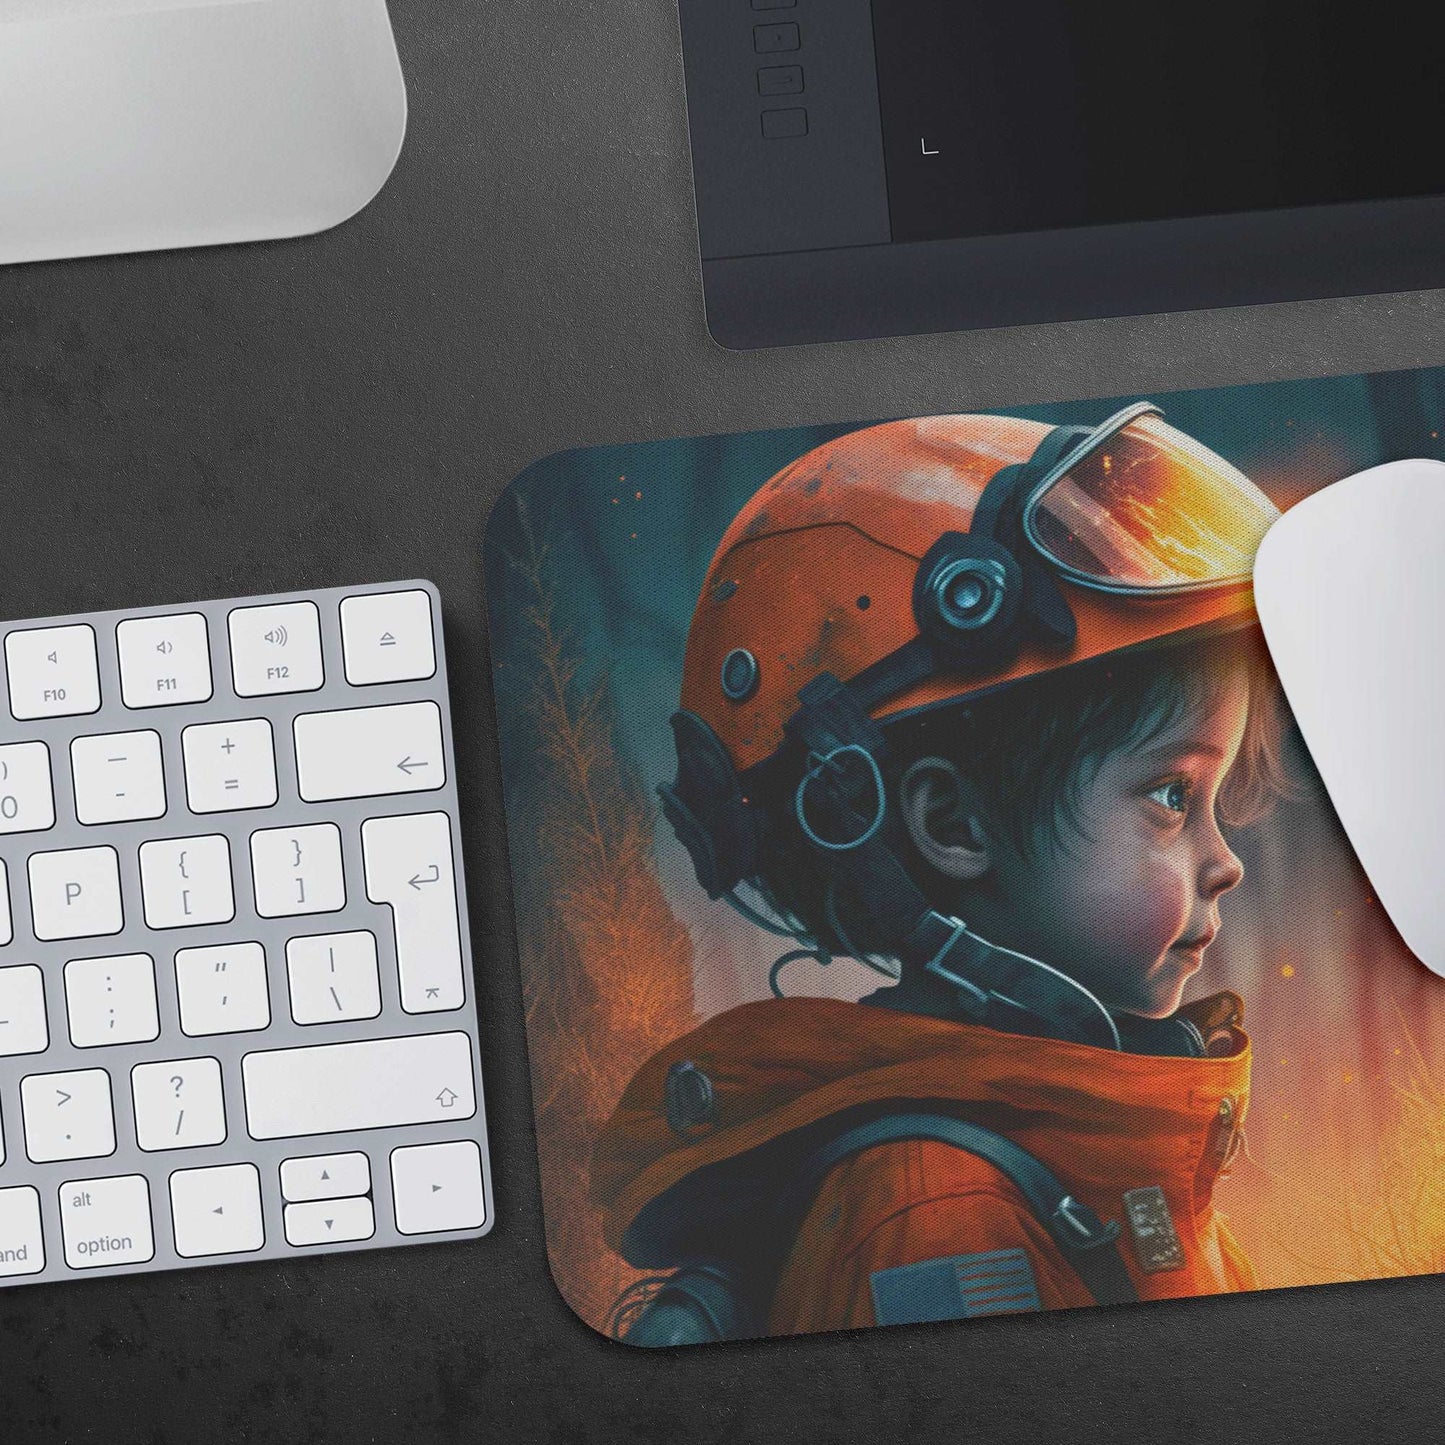 Mouse Pad - Jimmy the Firefighter